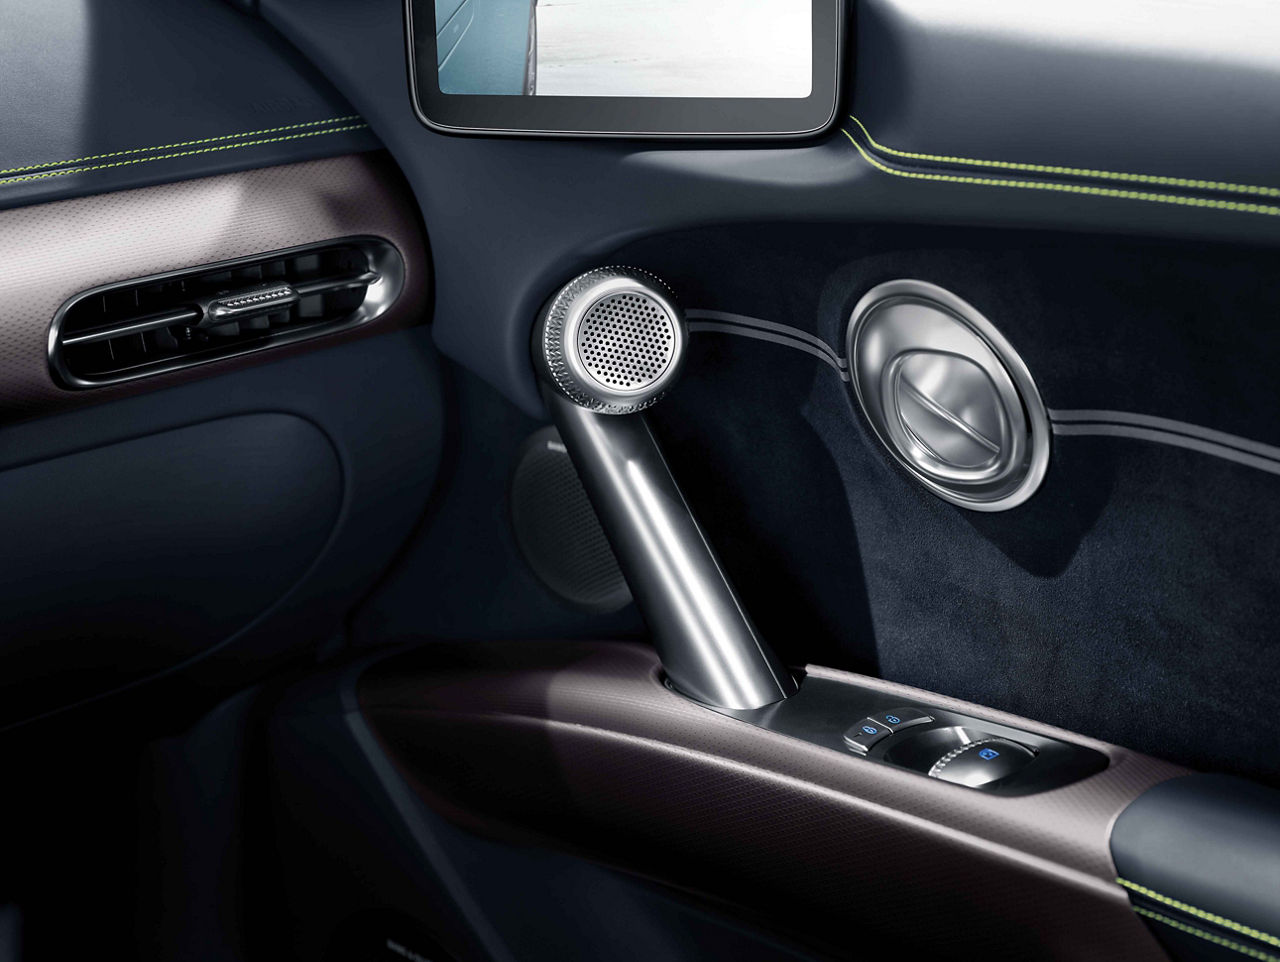 Interior view of the side door of the Genesis GV60 with black interior fittings